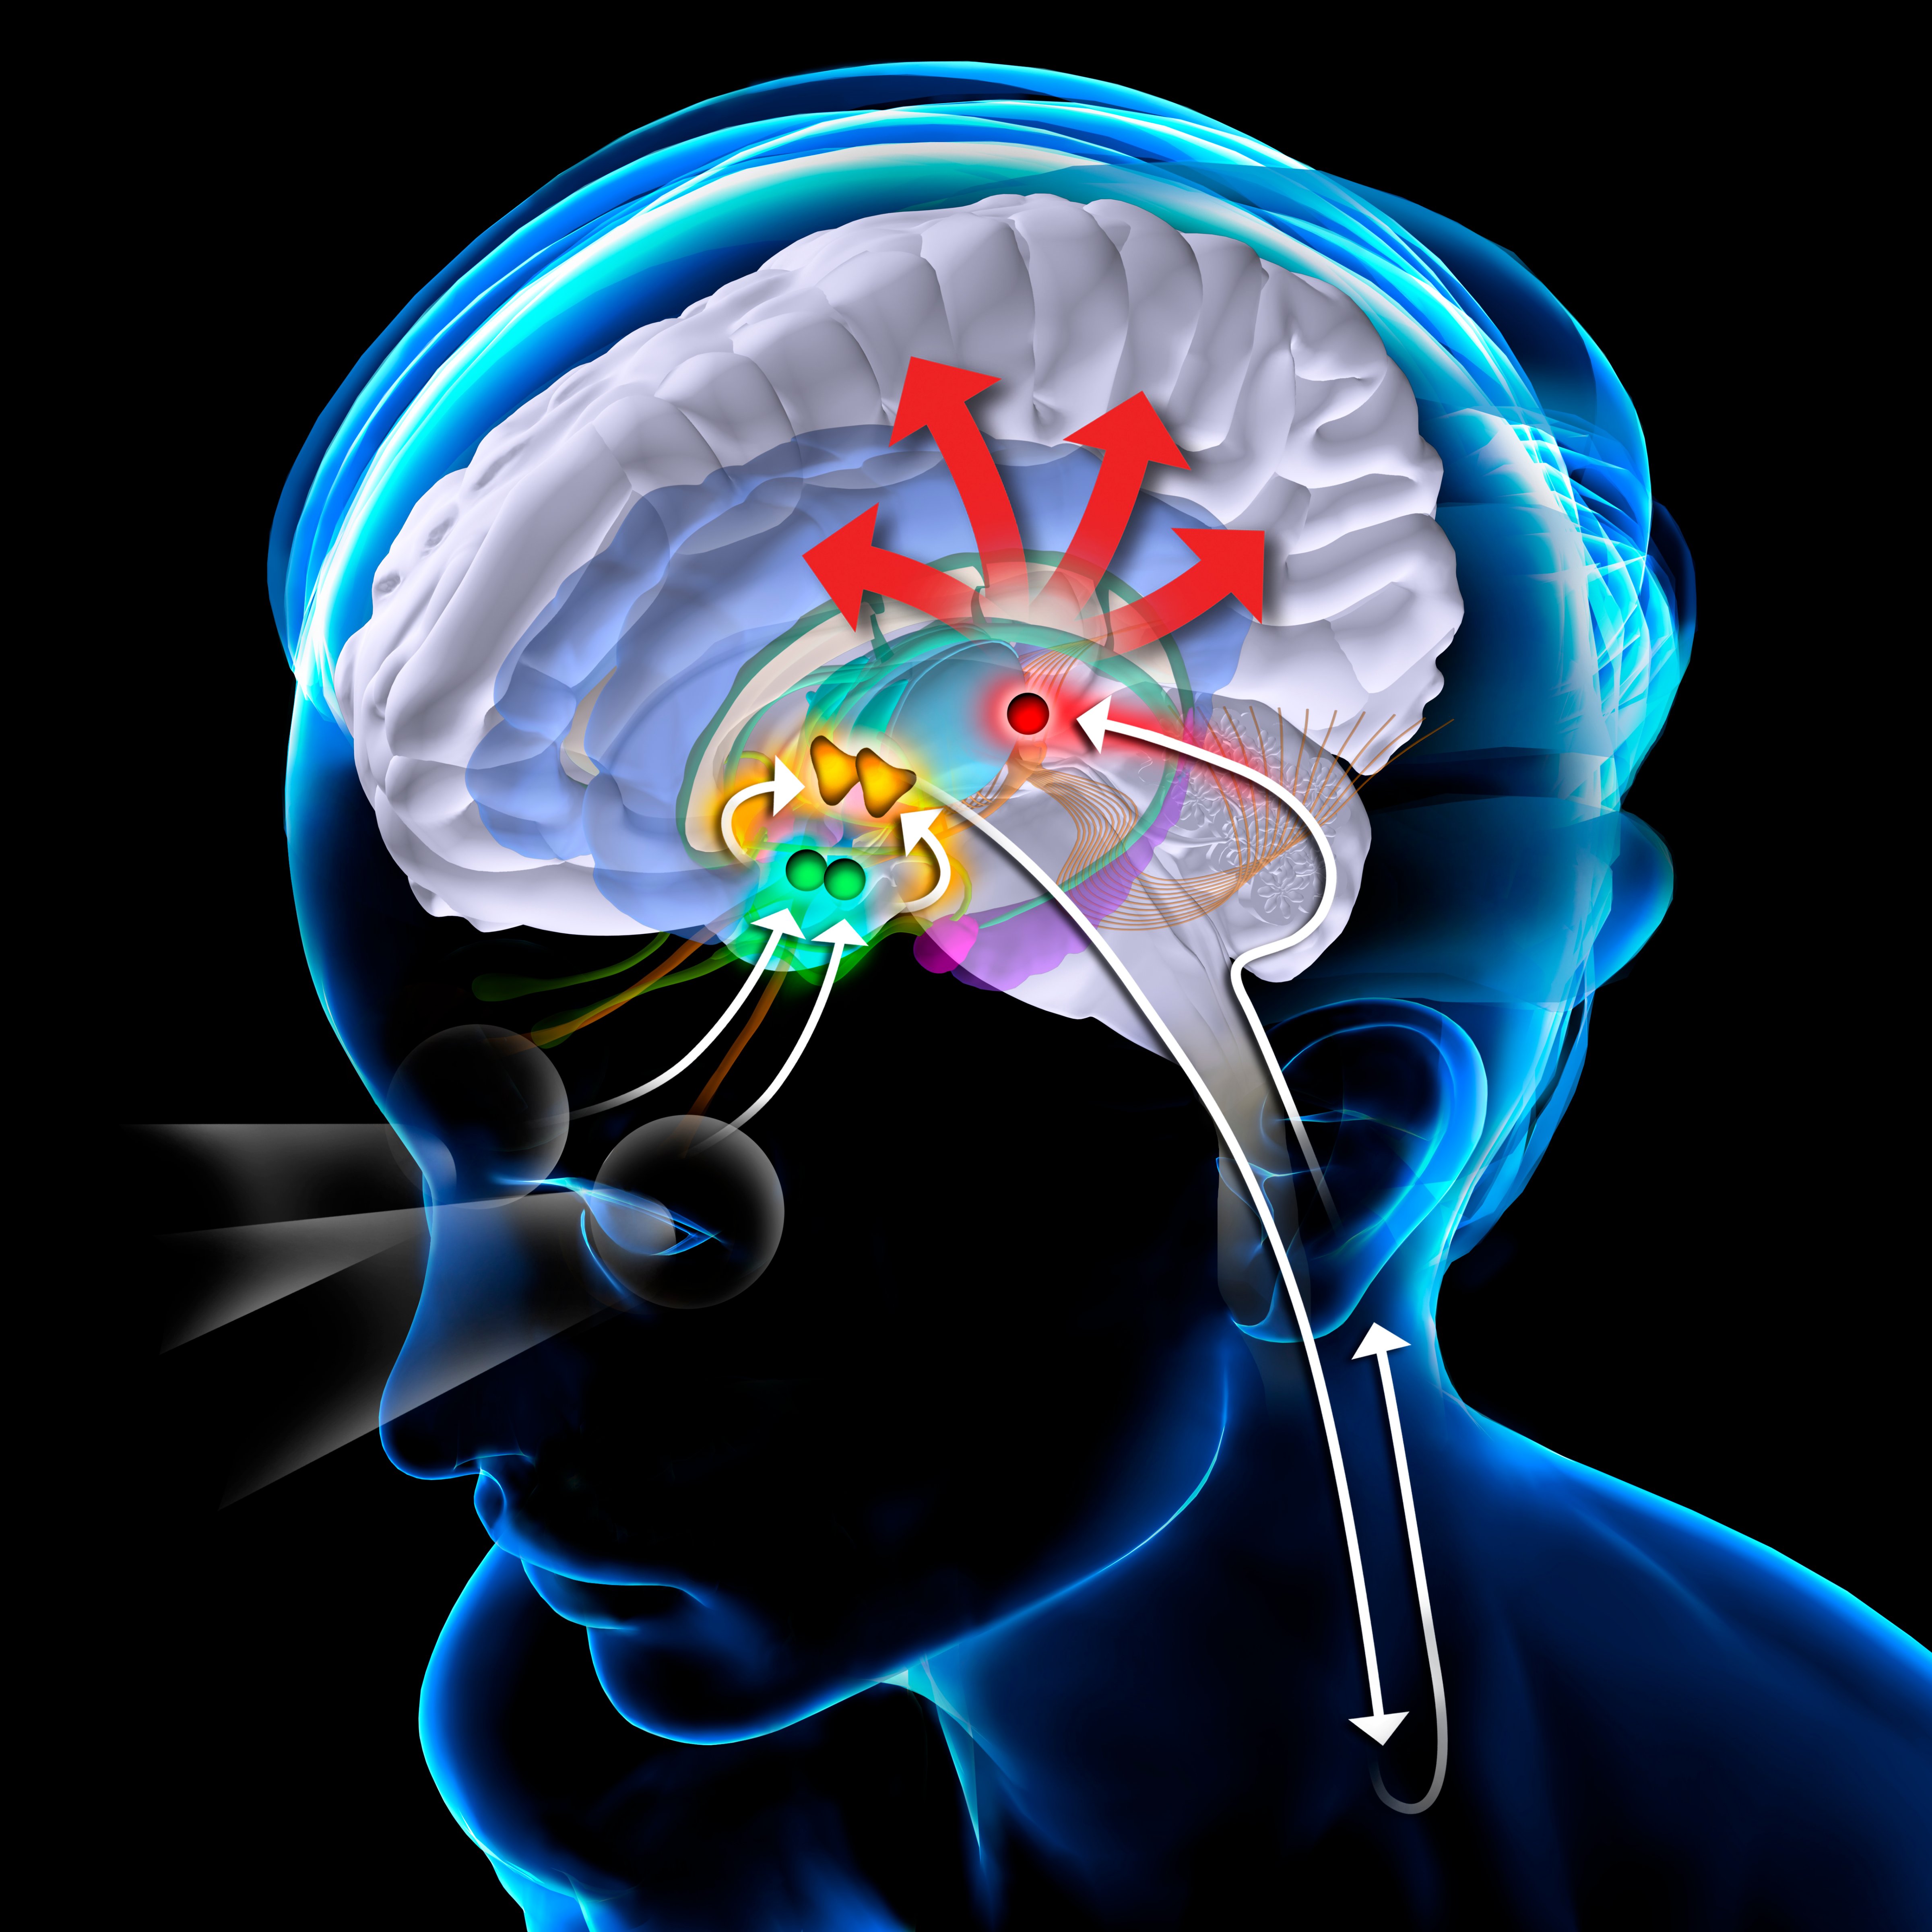 Melatonin hormone secreted by pineal gland (red) at night, regulates body's daily biological rhythm depending on luminosity as light regulates its secretion via a path involving the suprachiasmatic nucleus (green), the paraventricular nucleus (yellow) and the preganglionic sympathetic neurons. (BSIP/Universal Images Group via Getty)